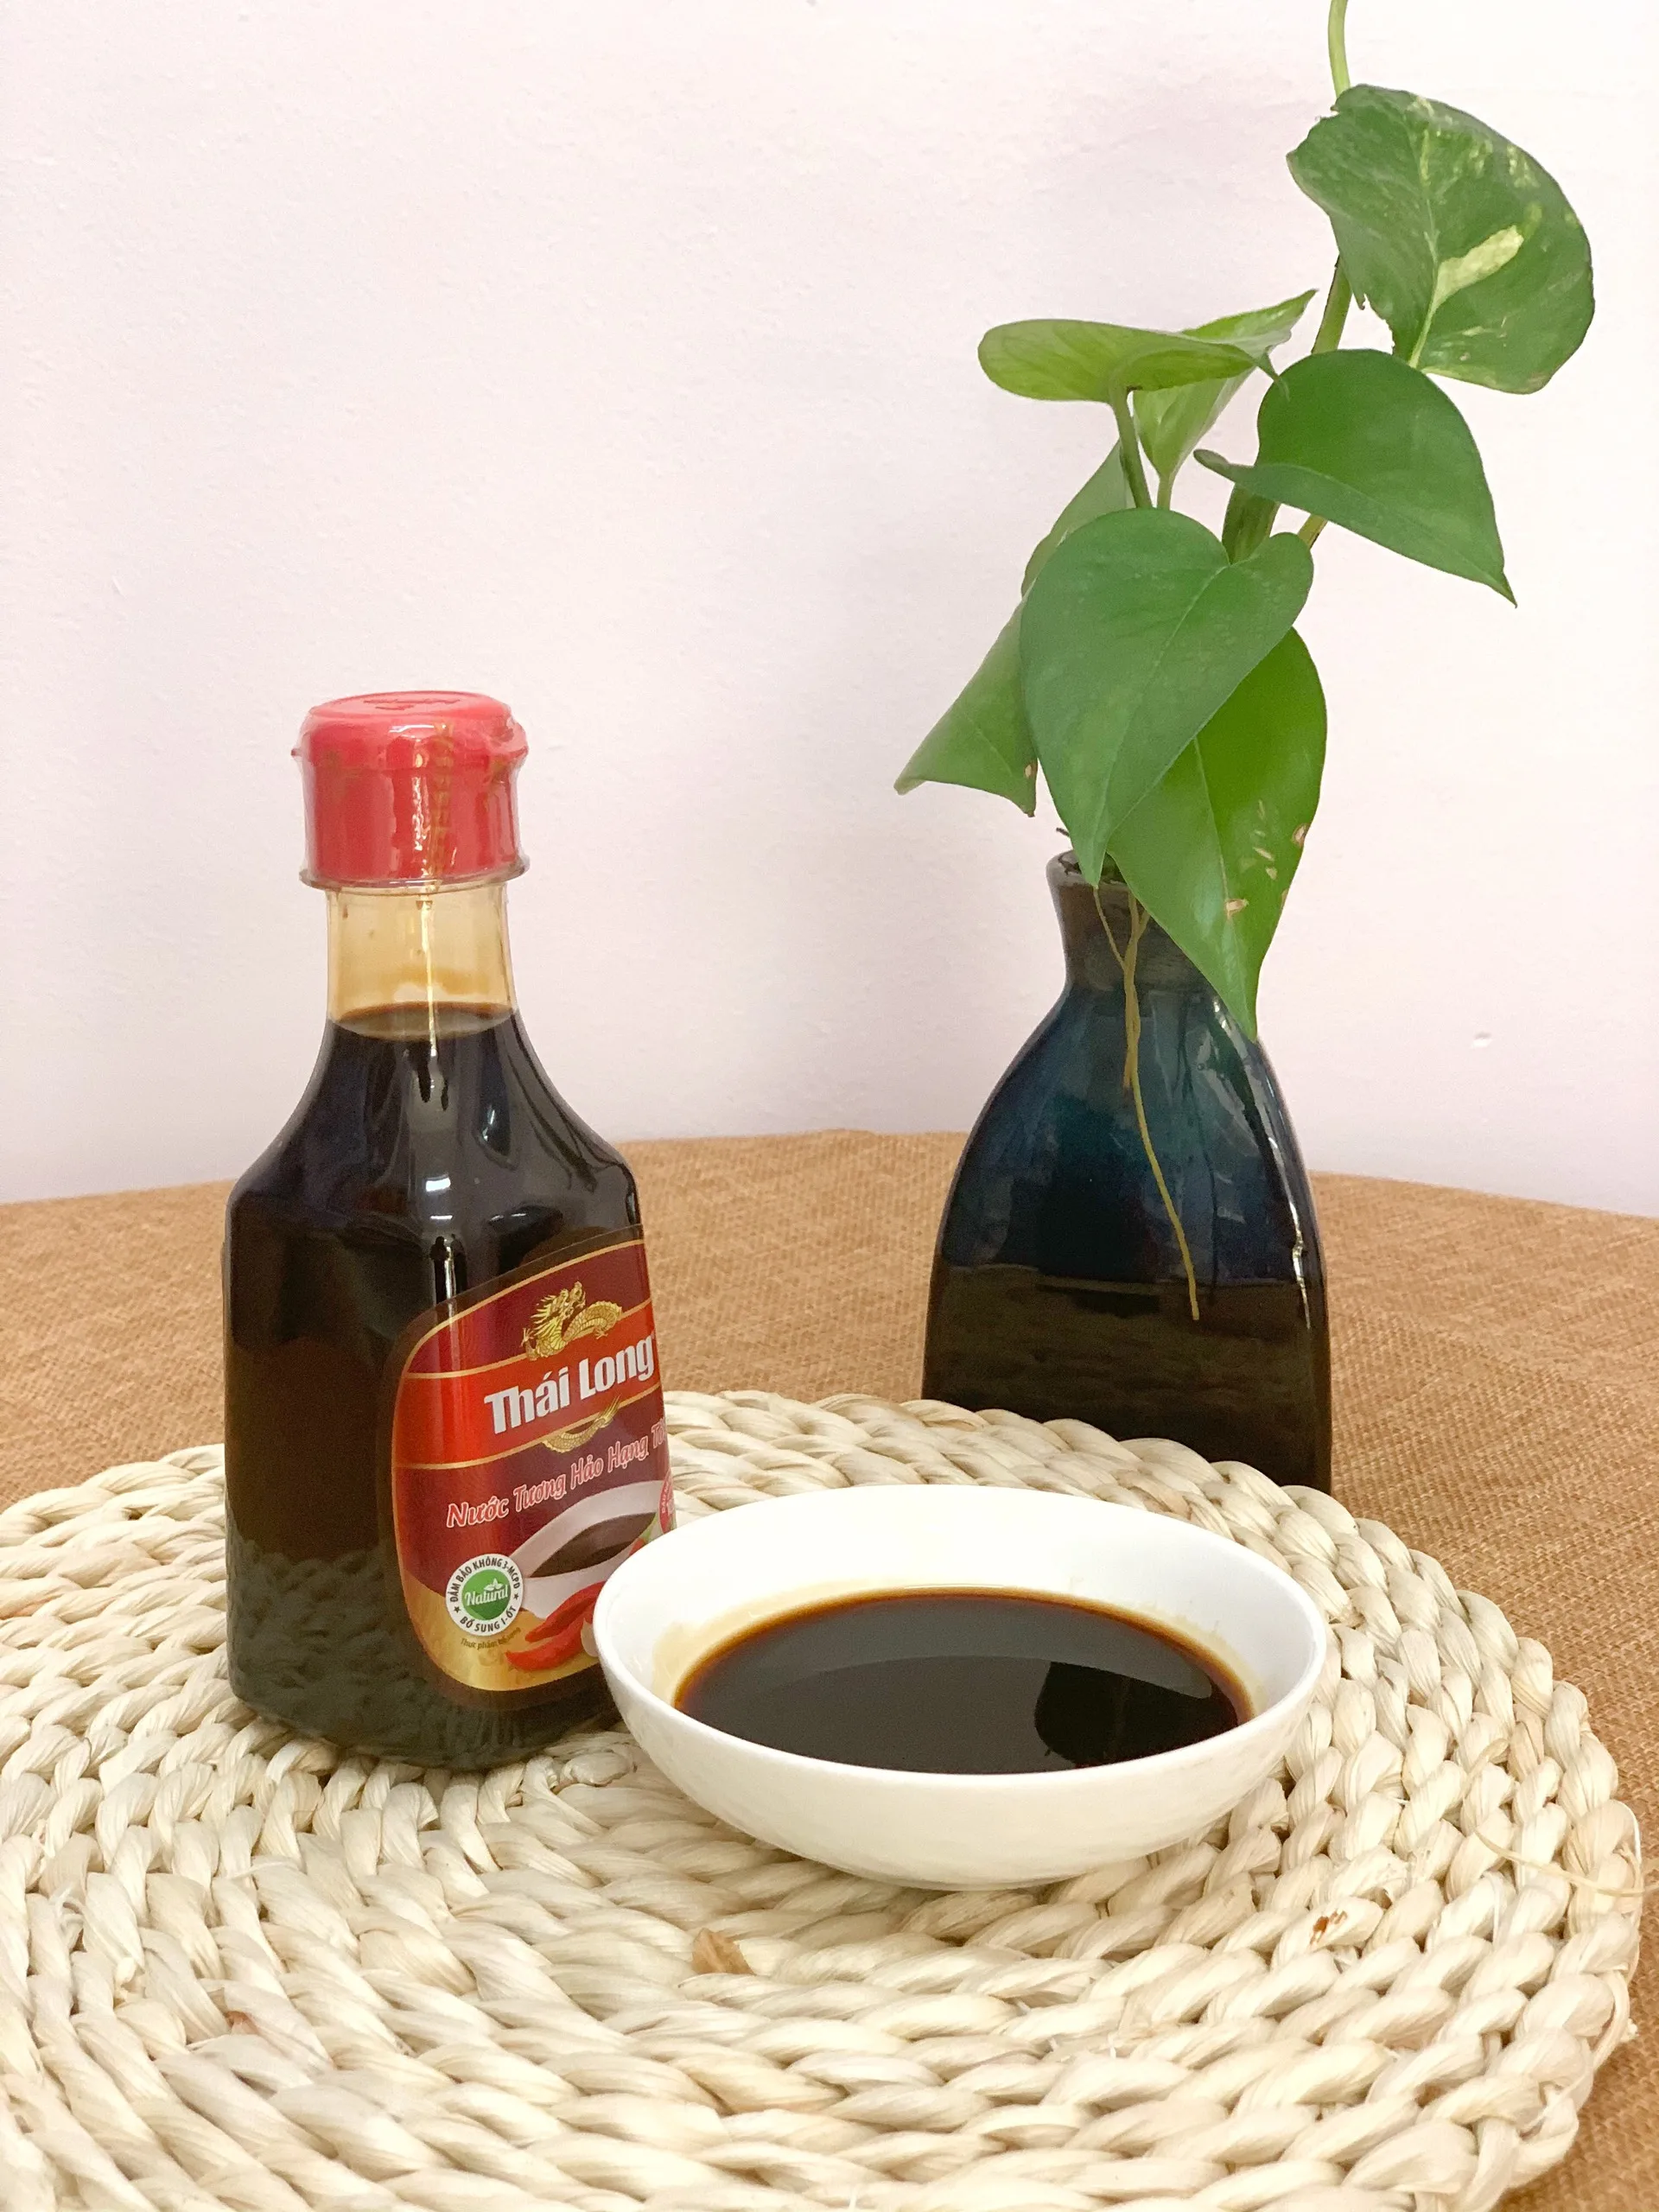 
Premium soy sauce with garlic and chili 250ml bottle made from Vietnam Manufacturer with OEM serivce 